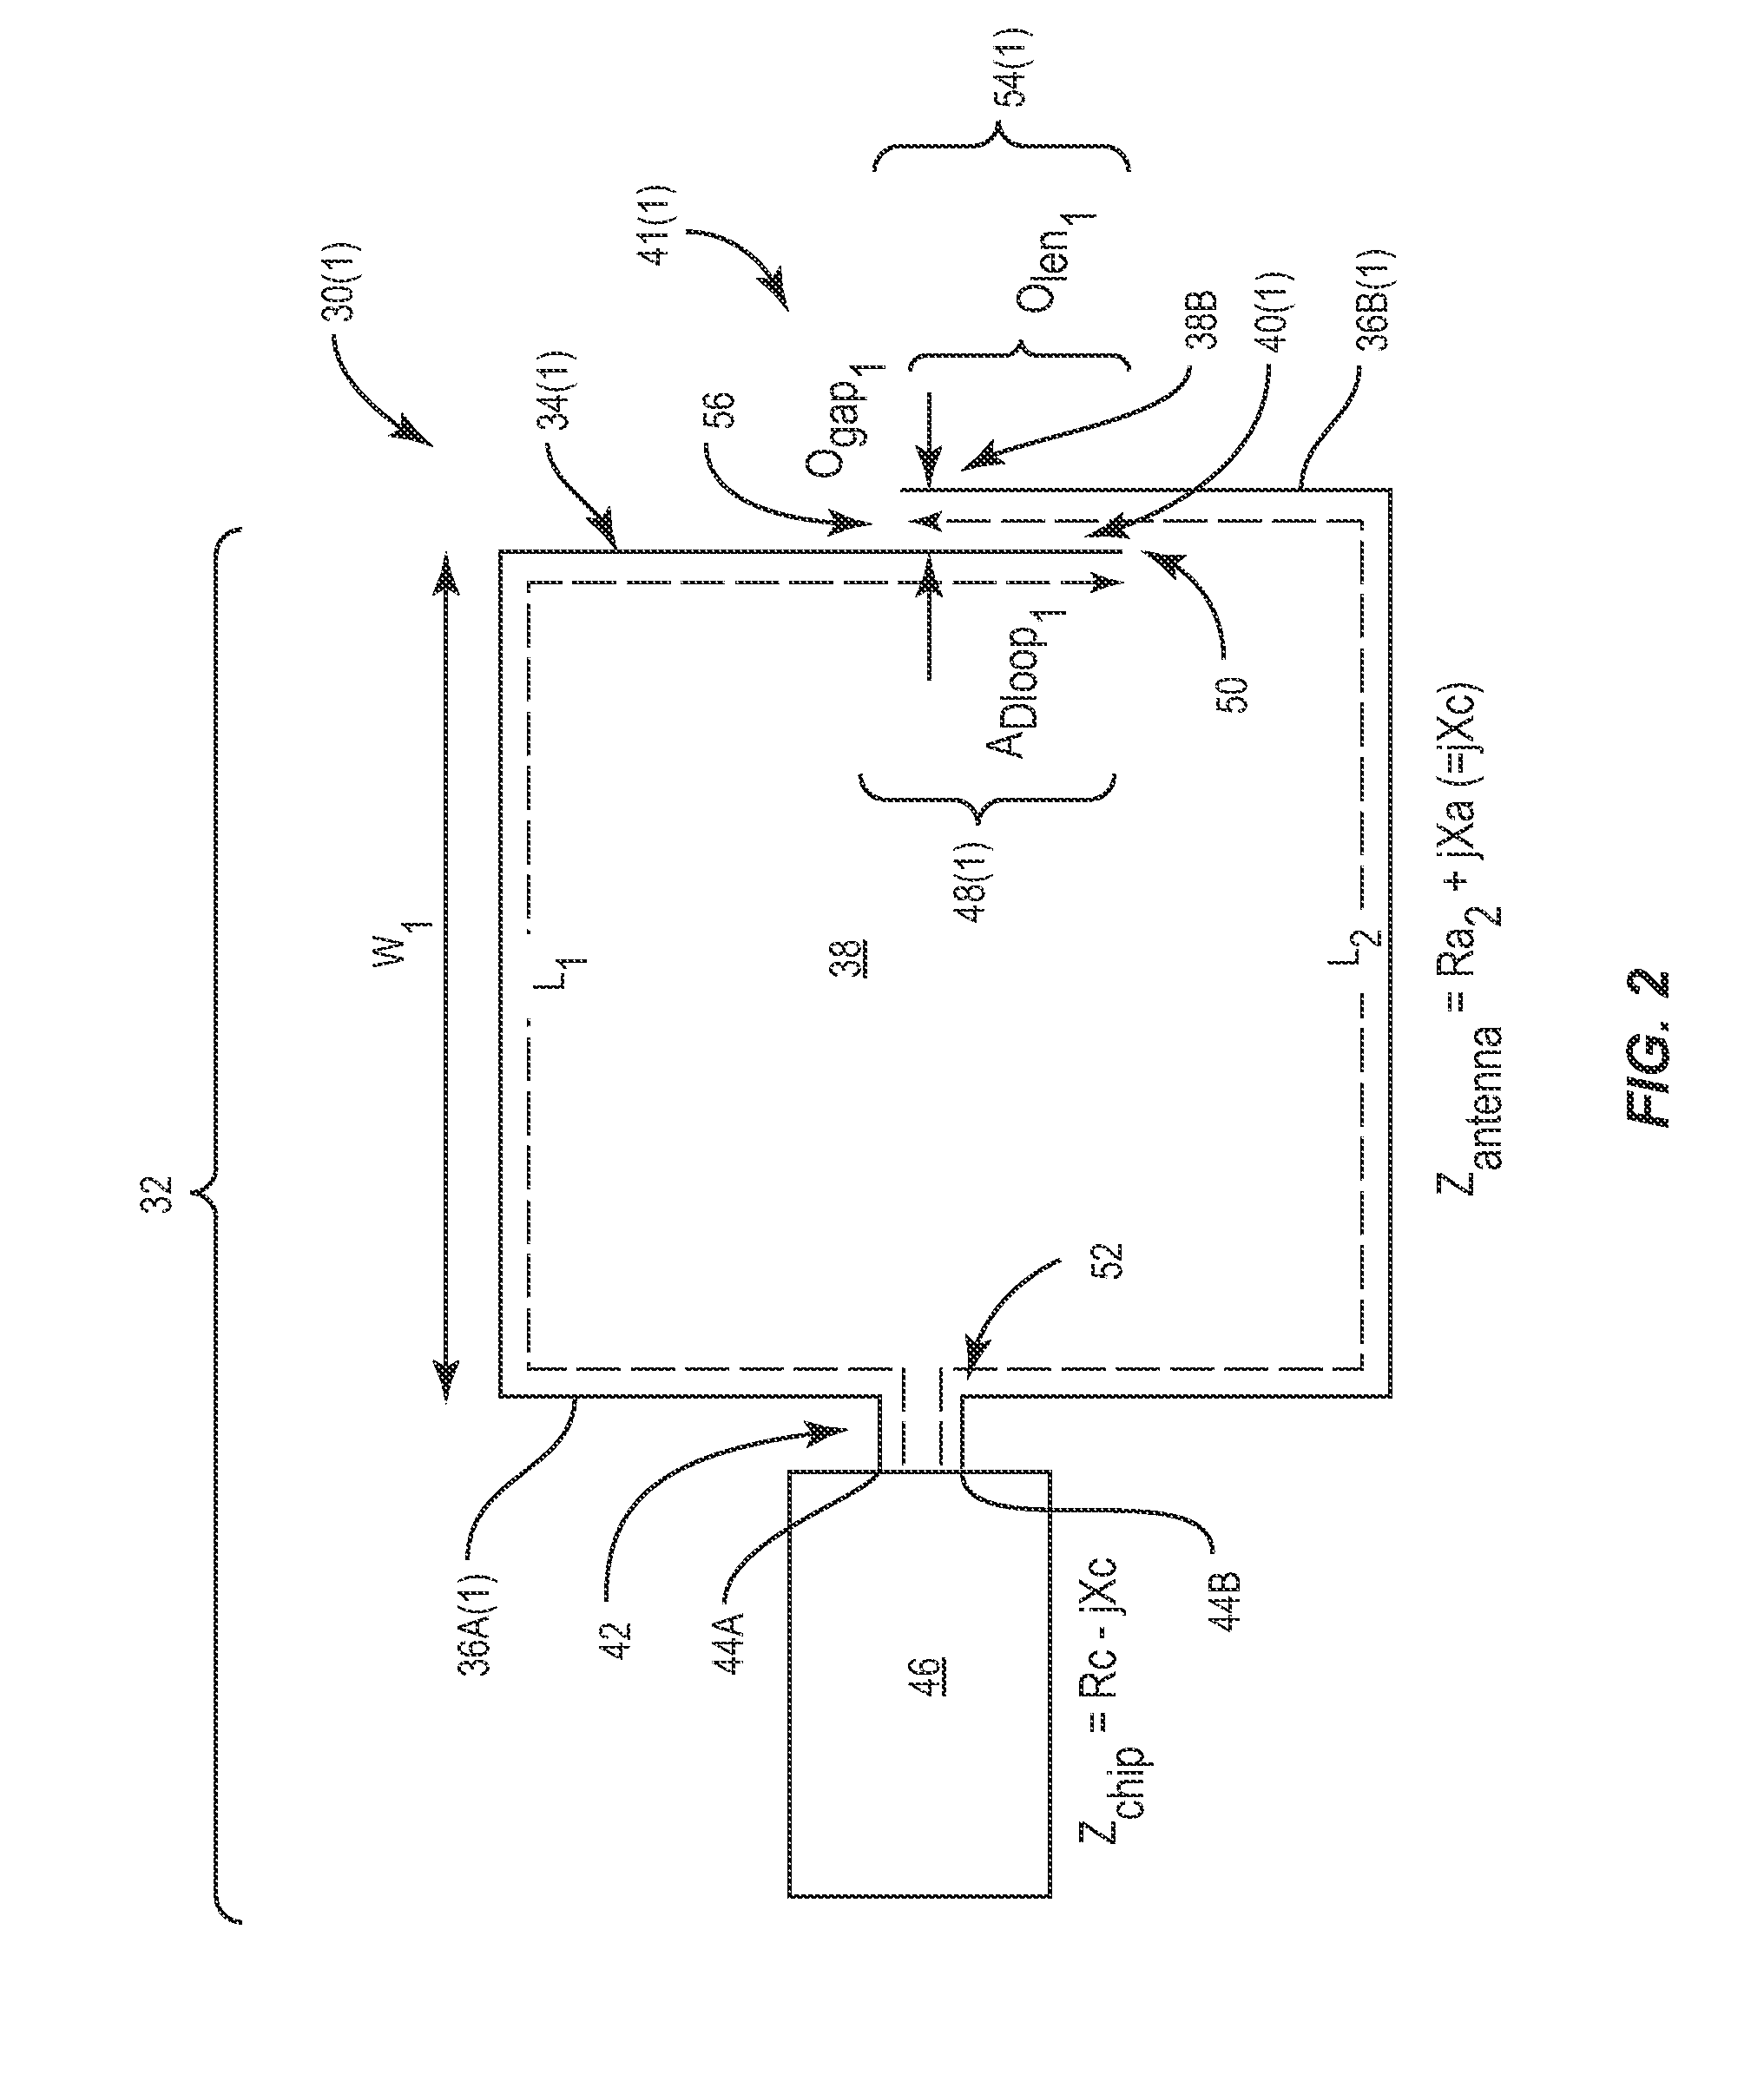 Discontinuous loop antennas suitable for radio-frequency identification (RFID) tags, and related components, systems, and methods